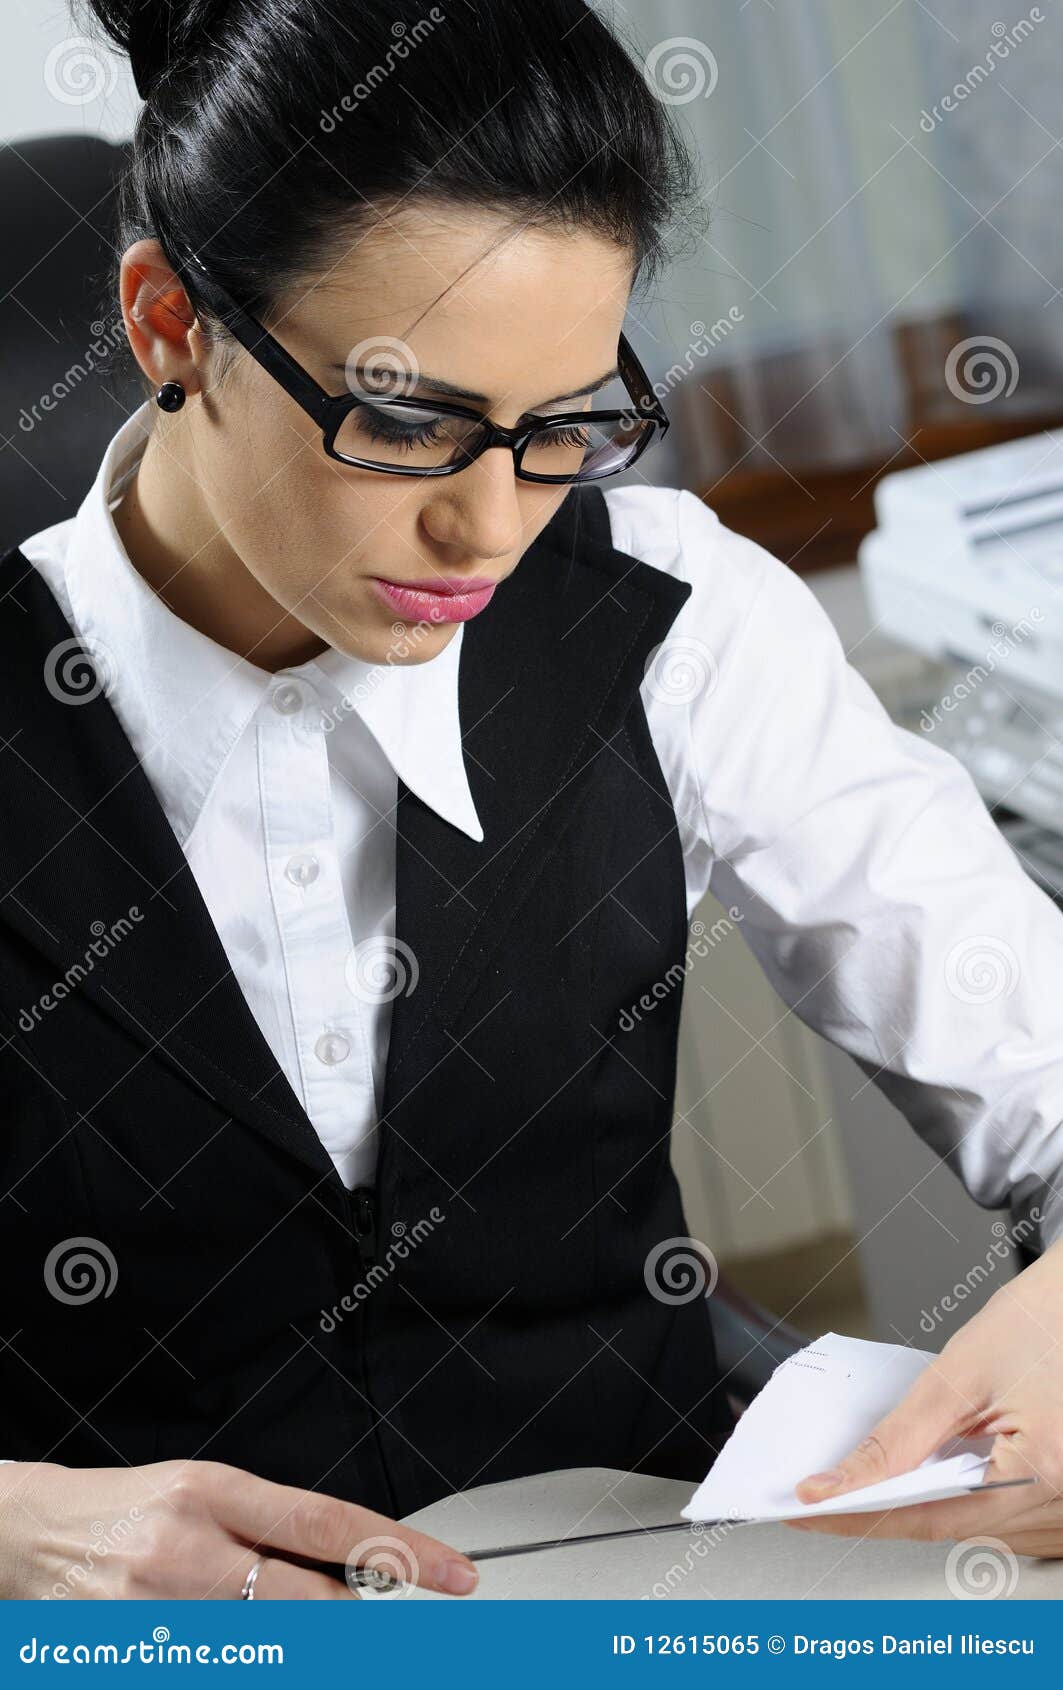 Business Woman Cutting  Paper  Stock Image Image of inside 